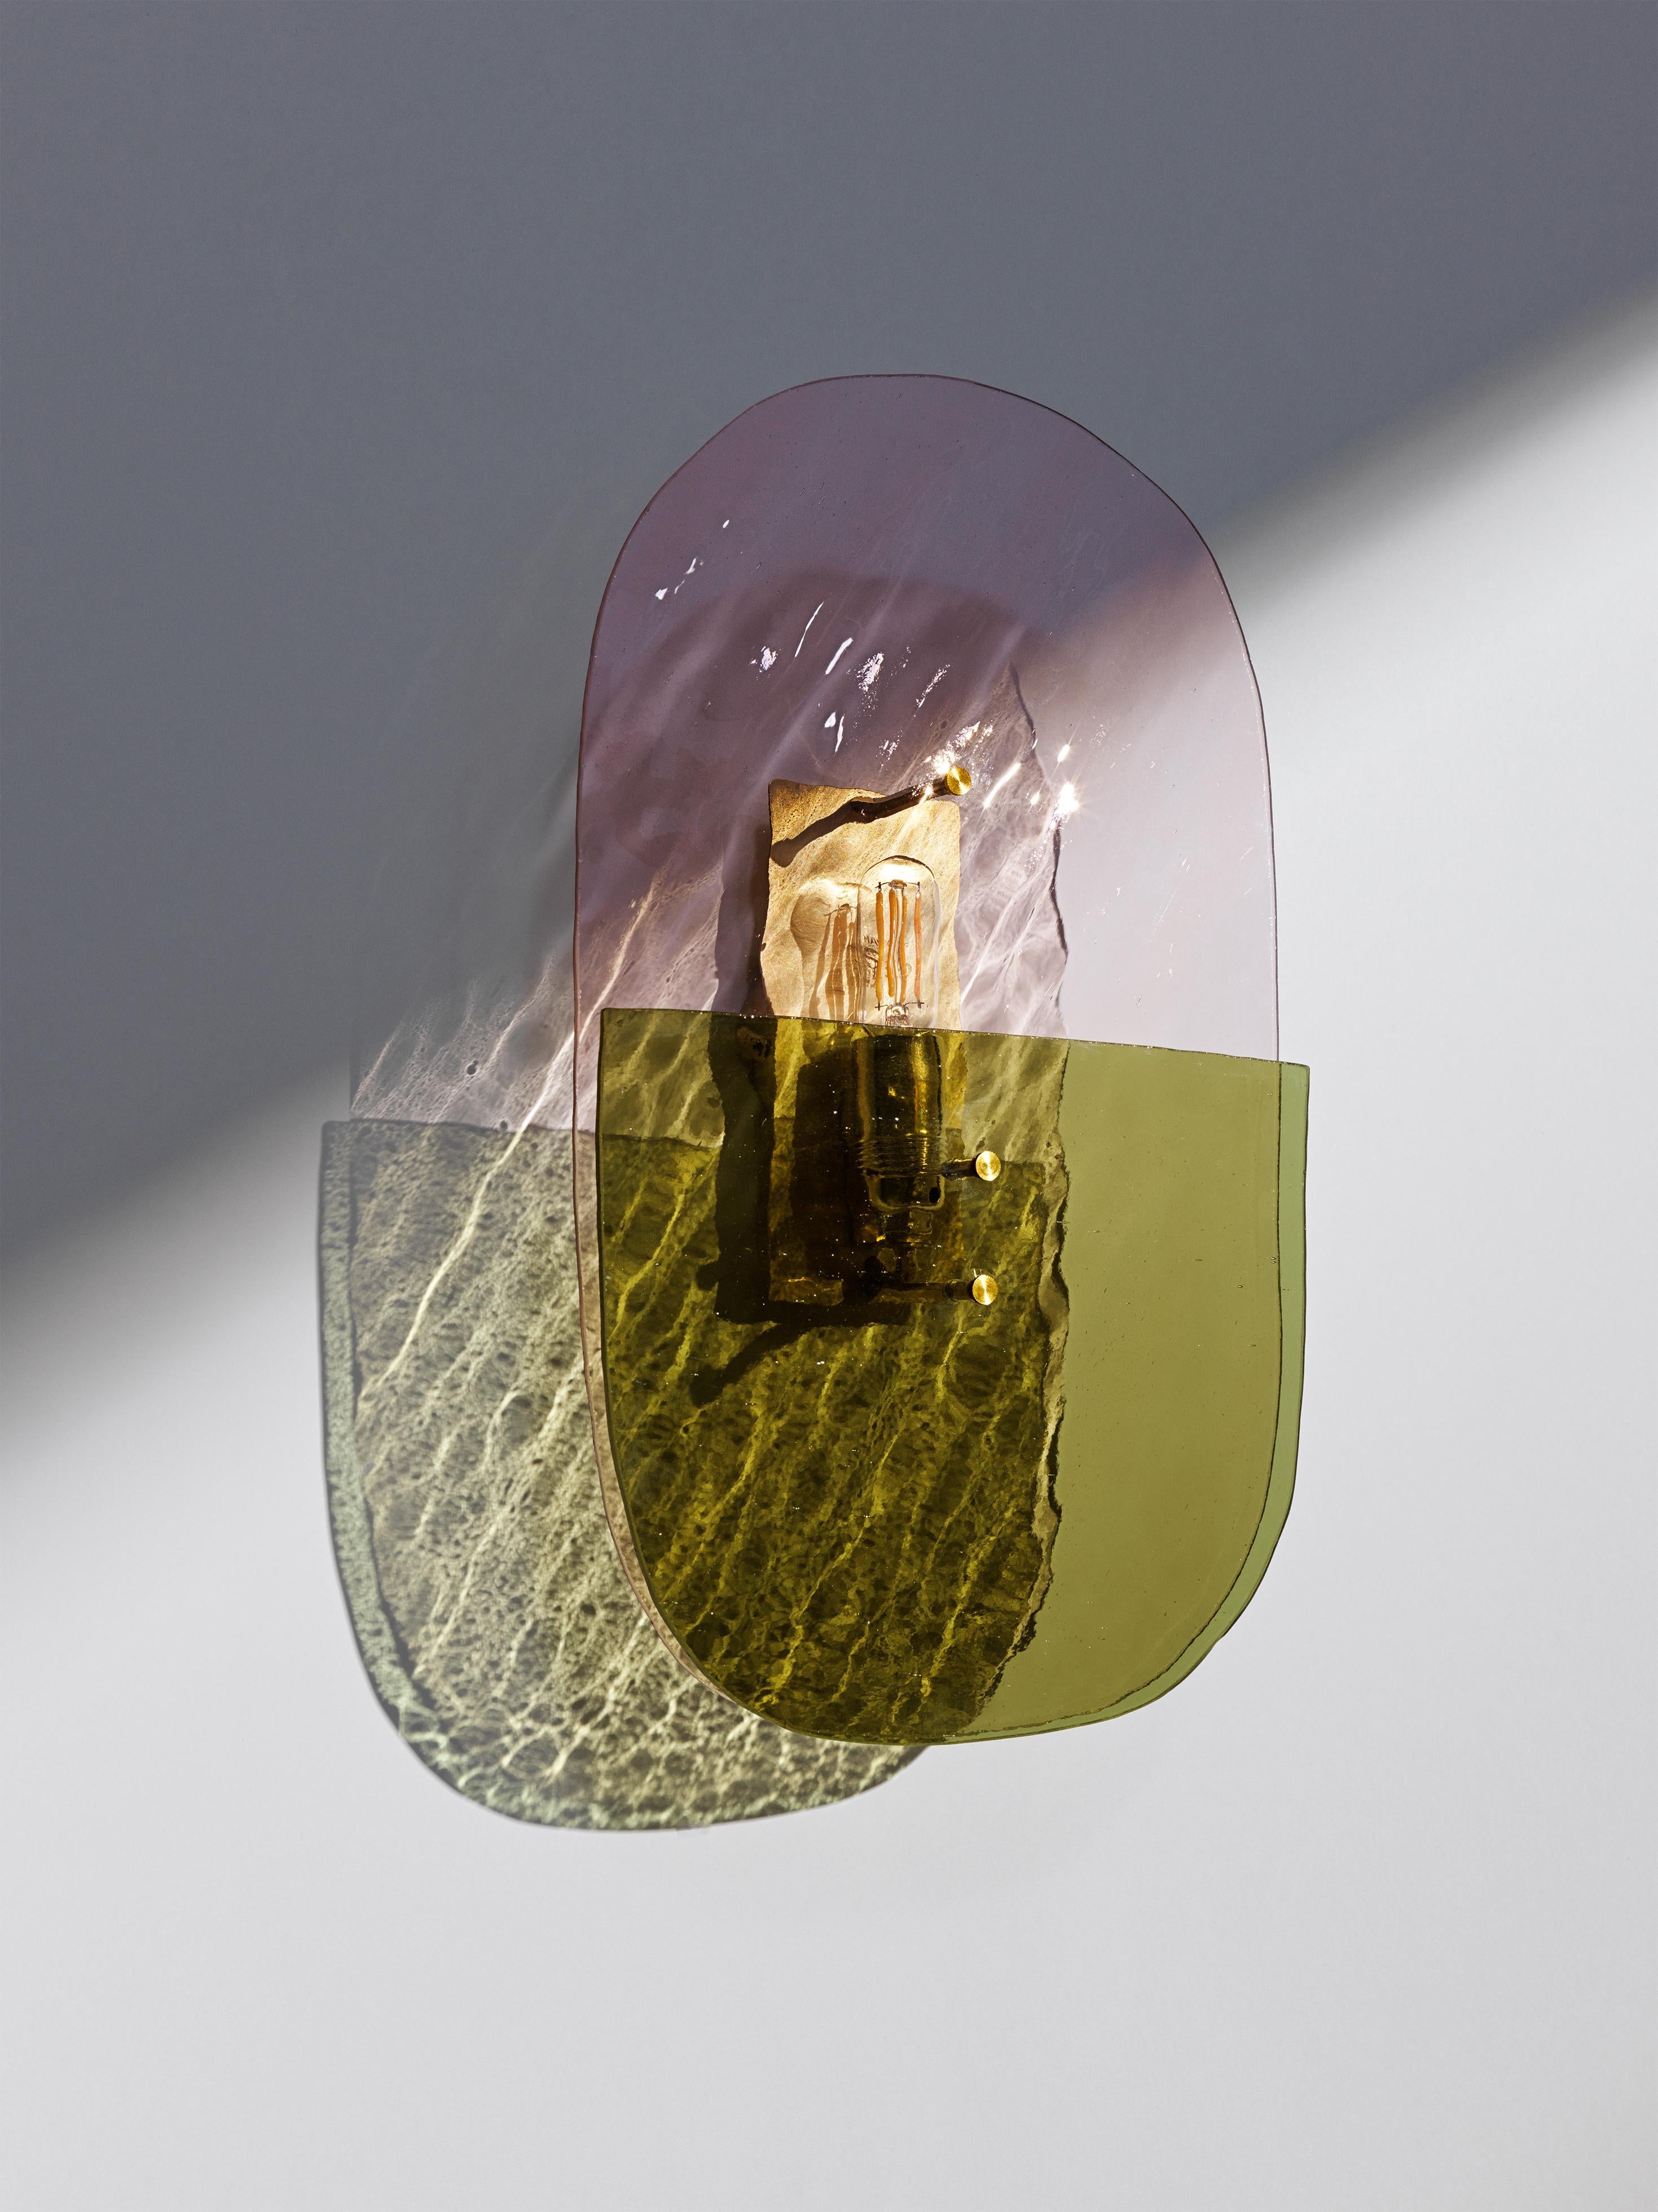 Pill 01 light sculpture by Marie Jeunet 
Dimensions: H 38.5 x L 22.5 cm
Materials: Champagne pink wave glass sheet, smooth olive green glass sheet, brushed brass structure and finish

LES PRECIEUX 
These luminous sculptures evolve with the